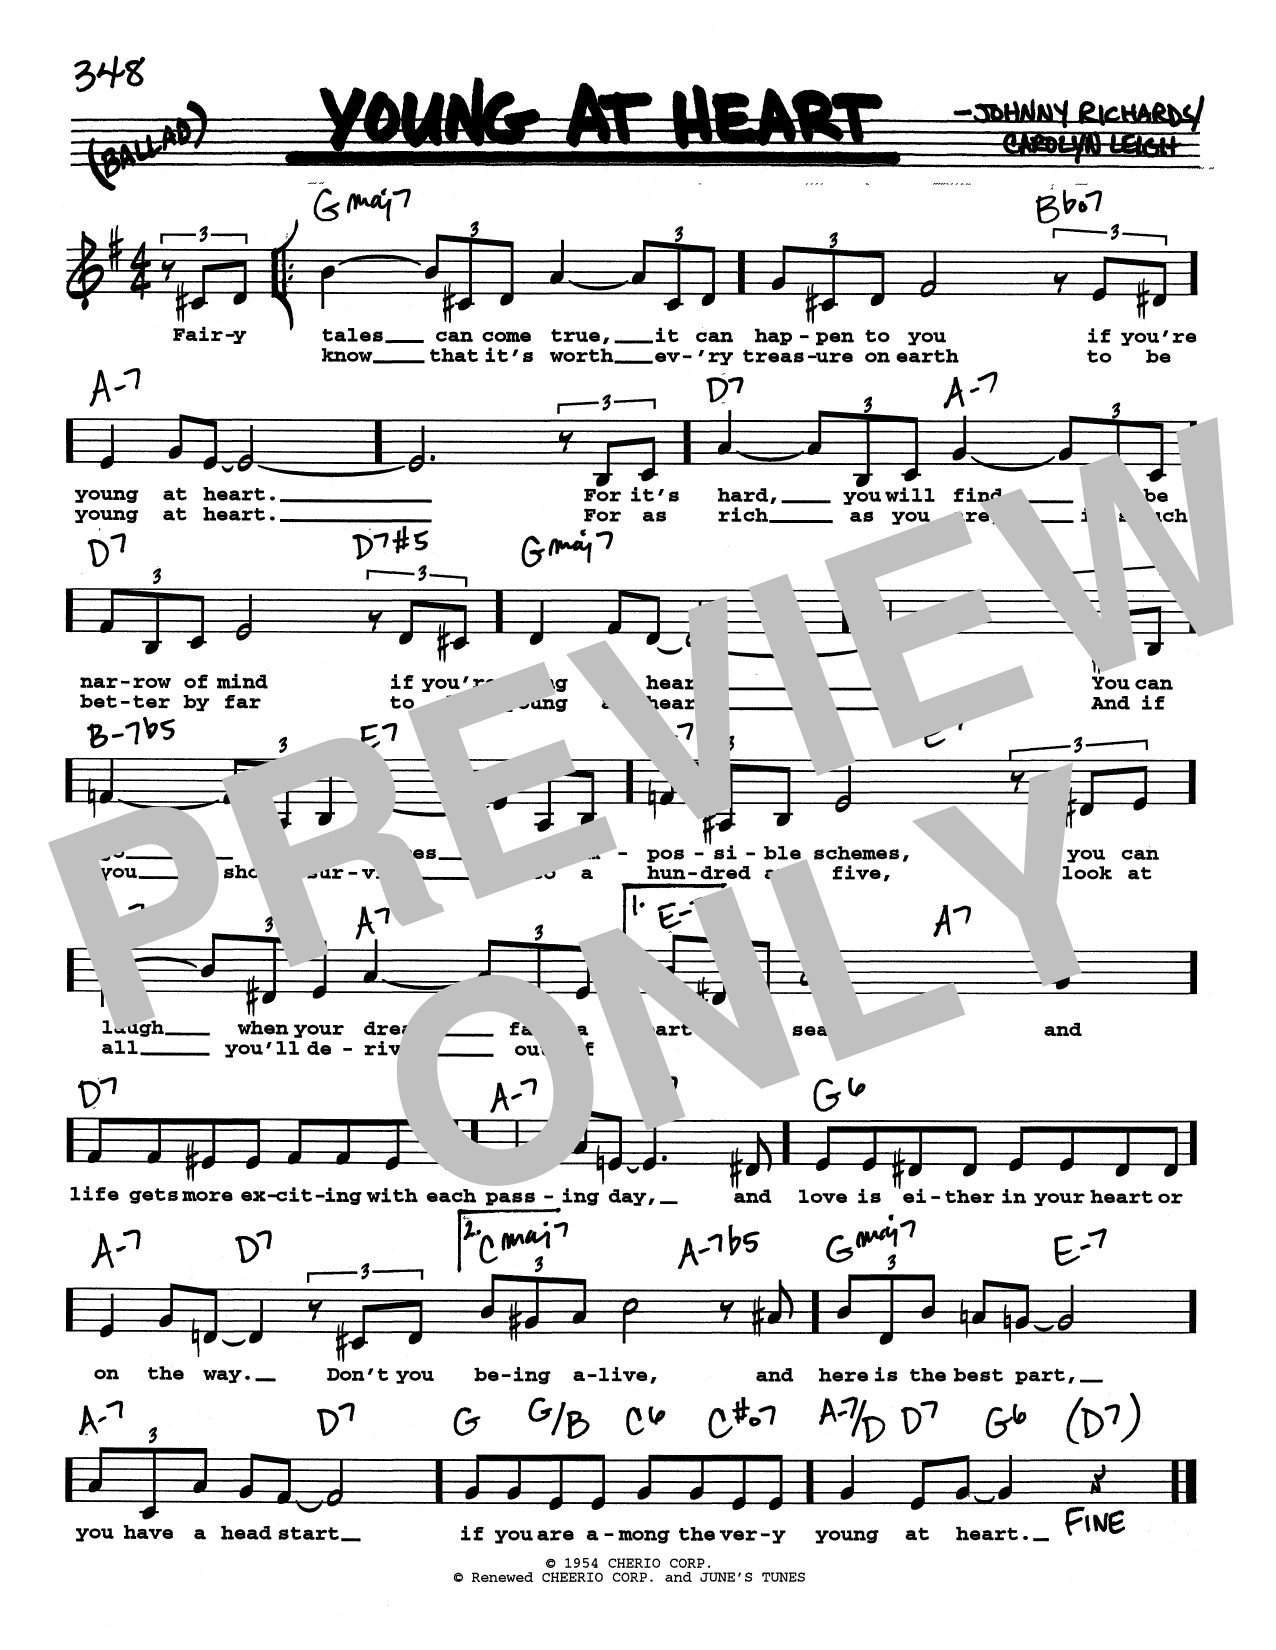 Carolyn Leigh Young At Heart (Low Voice) sheet music notes printable PDF score